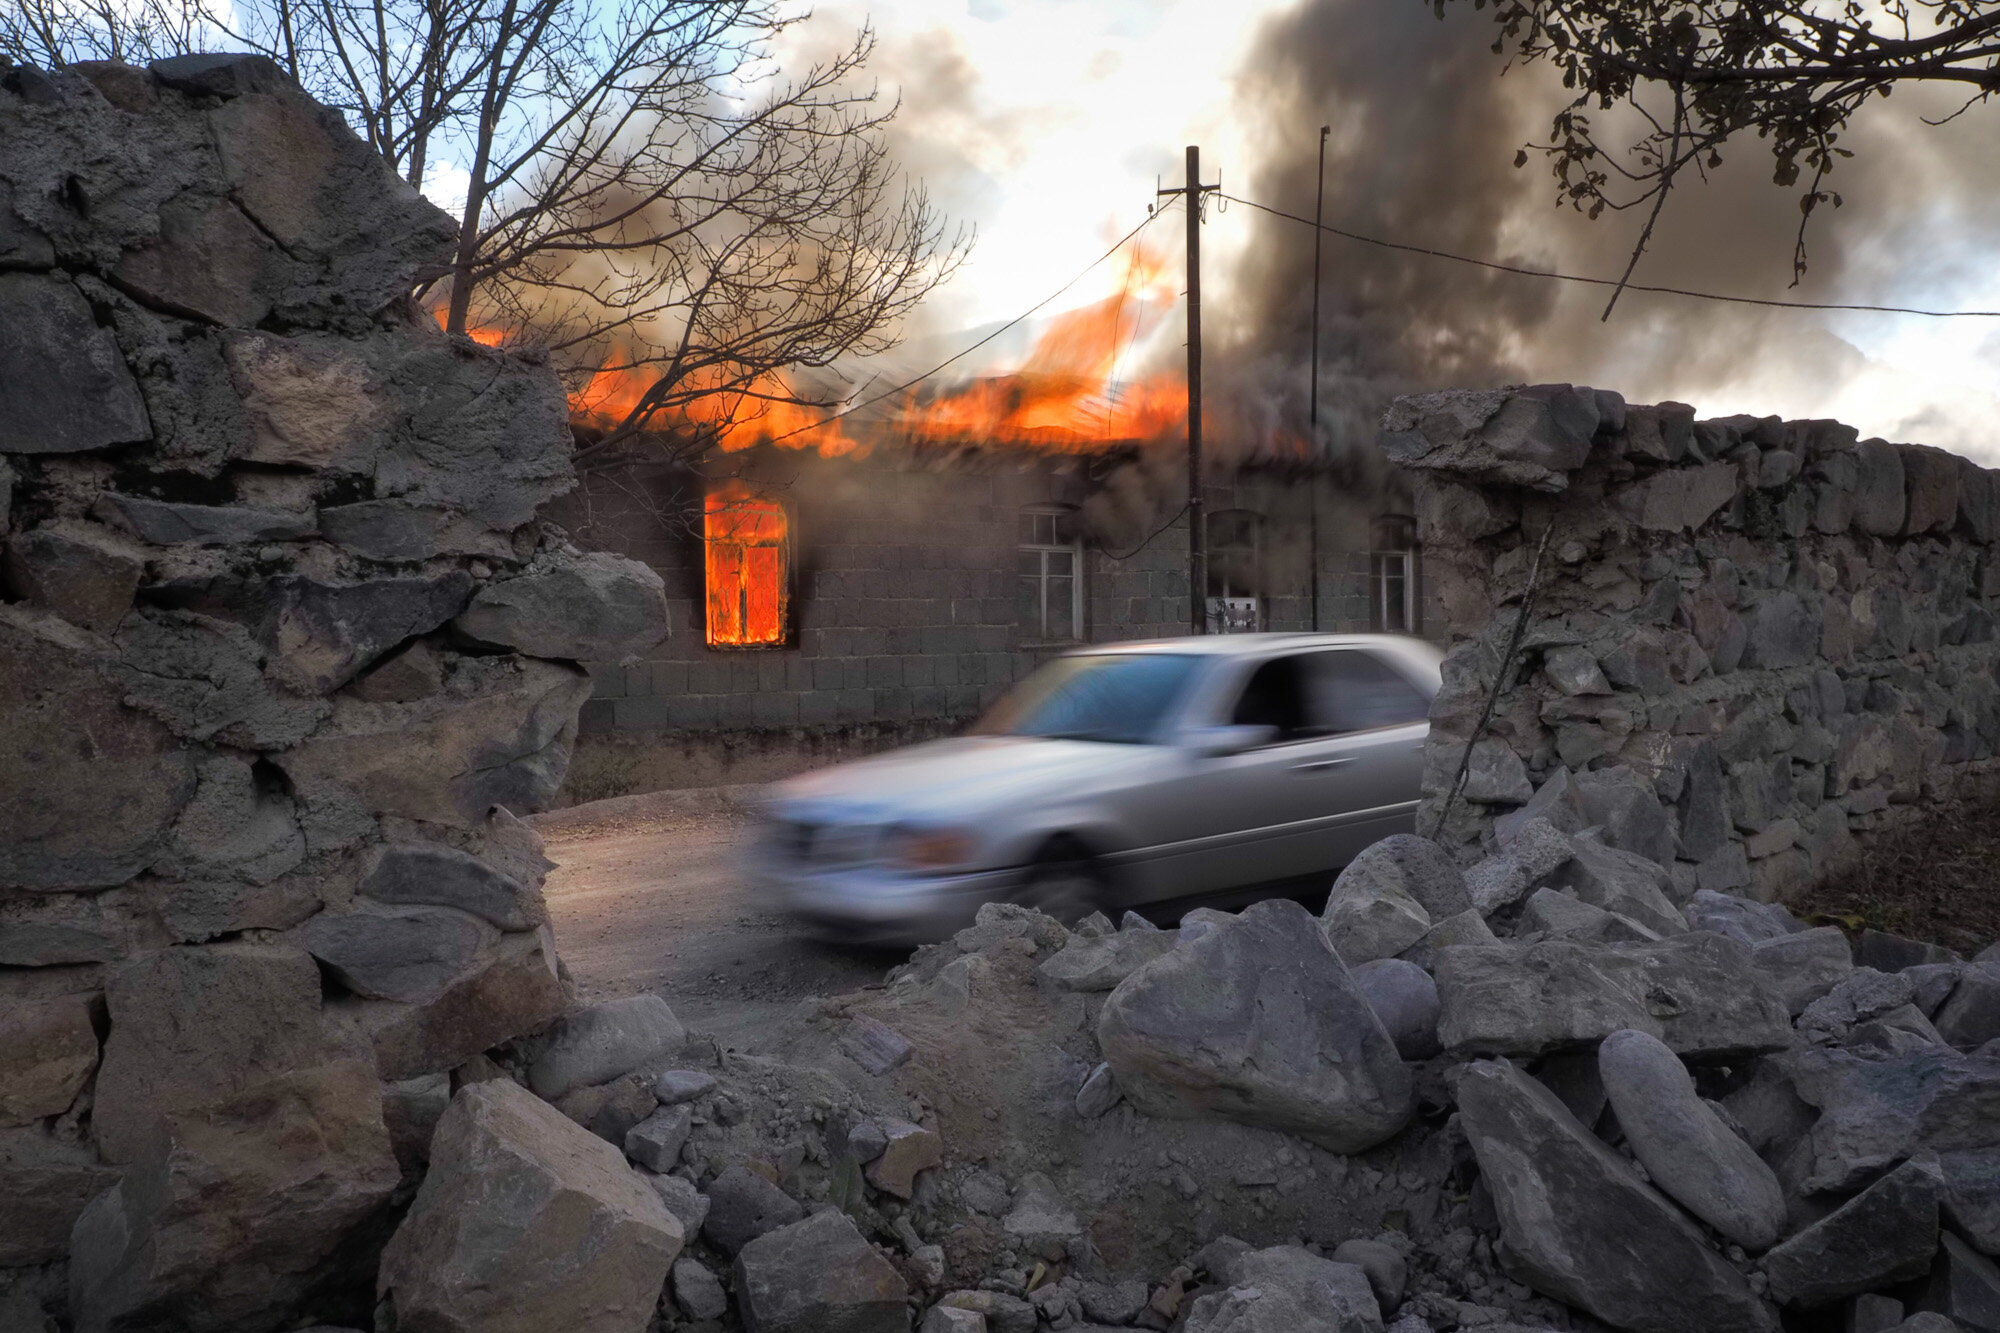  Smoke and flame rise from a burning house in an area once occupied by Armenian forces but soon to be turned over to Azerbaijan, in Karvachar, the separatist region of Nagorno-Karabakh, on Nov. 13, 2020. (AP Photo/Dmitry Lovetsky) 